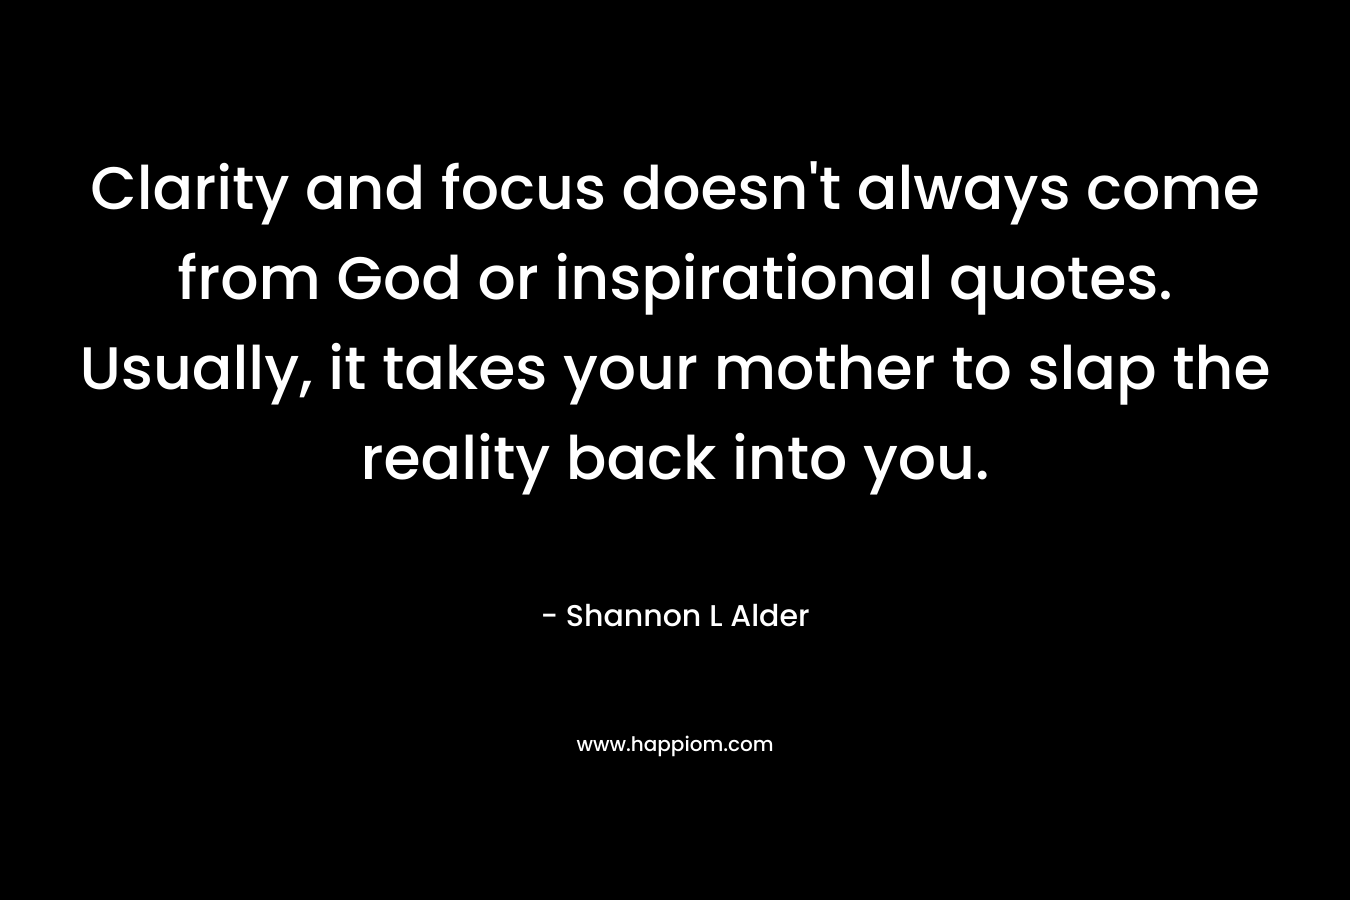 Clarity and focus doesn't always come from God or inspirational quotes. Usually, it takes your mother to slap the reality back into you.